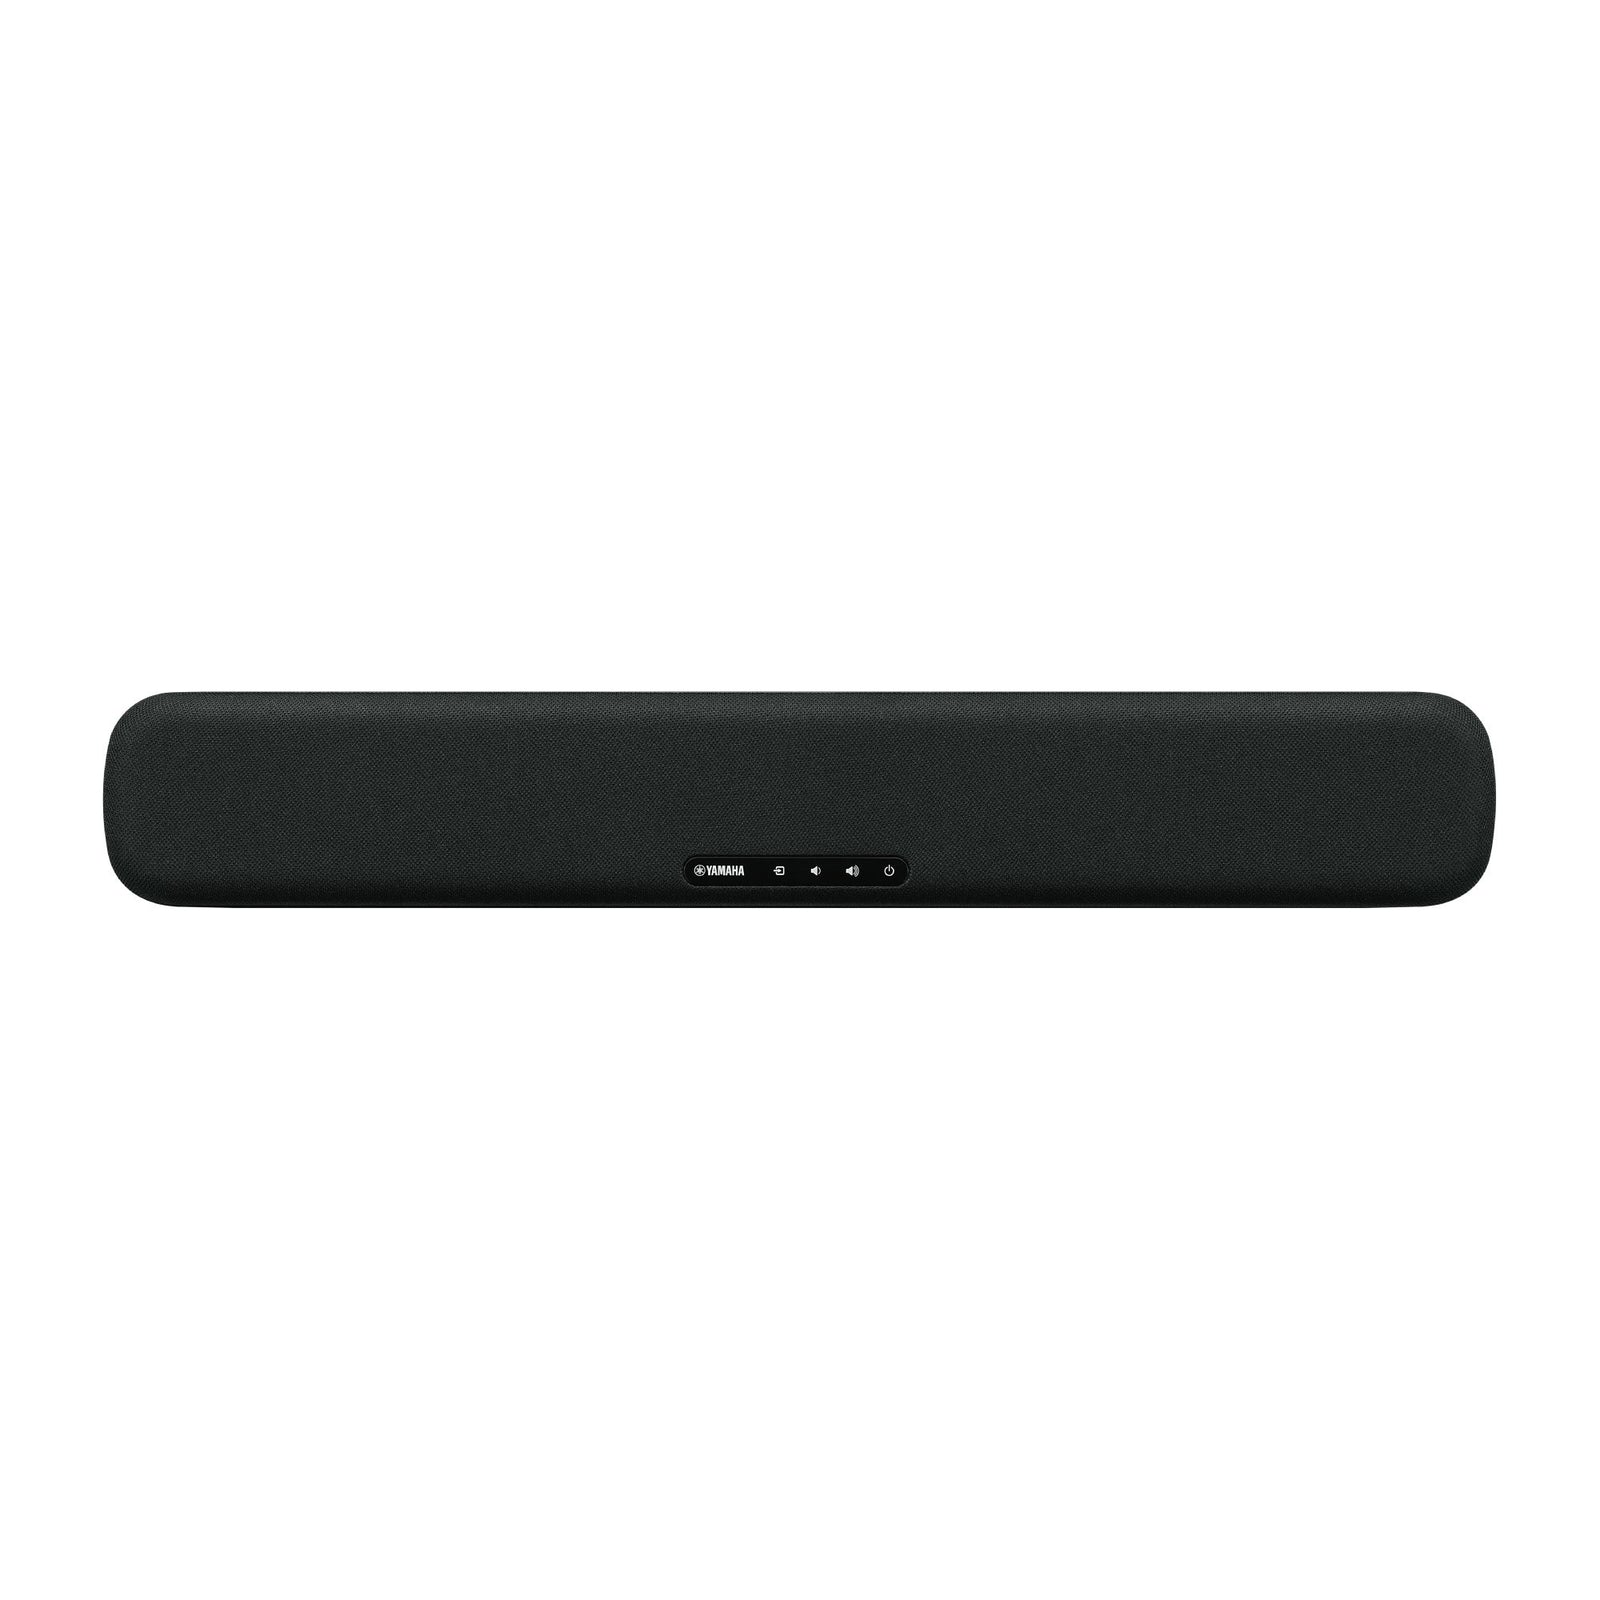 YAMAHA SR-C20A - SOUND BARS | VINYL SOUND - Compact Sound Bar with built-in subwoofer, Bluetooth® and Clear Voice. The perfect space-saving solution with uncompromised Clear and Immersive sound and built-in subwoofer. (W600mm x H64mm x D94mm) Clear Voice for enhanced dialogue quality Bluetooth® connectivity for streaming wireless music